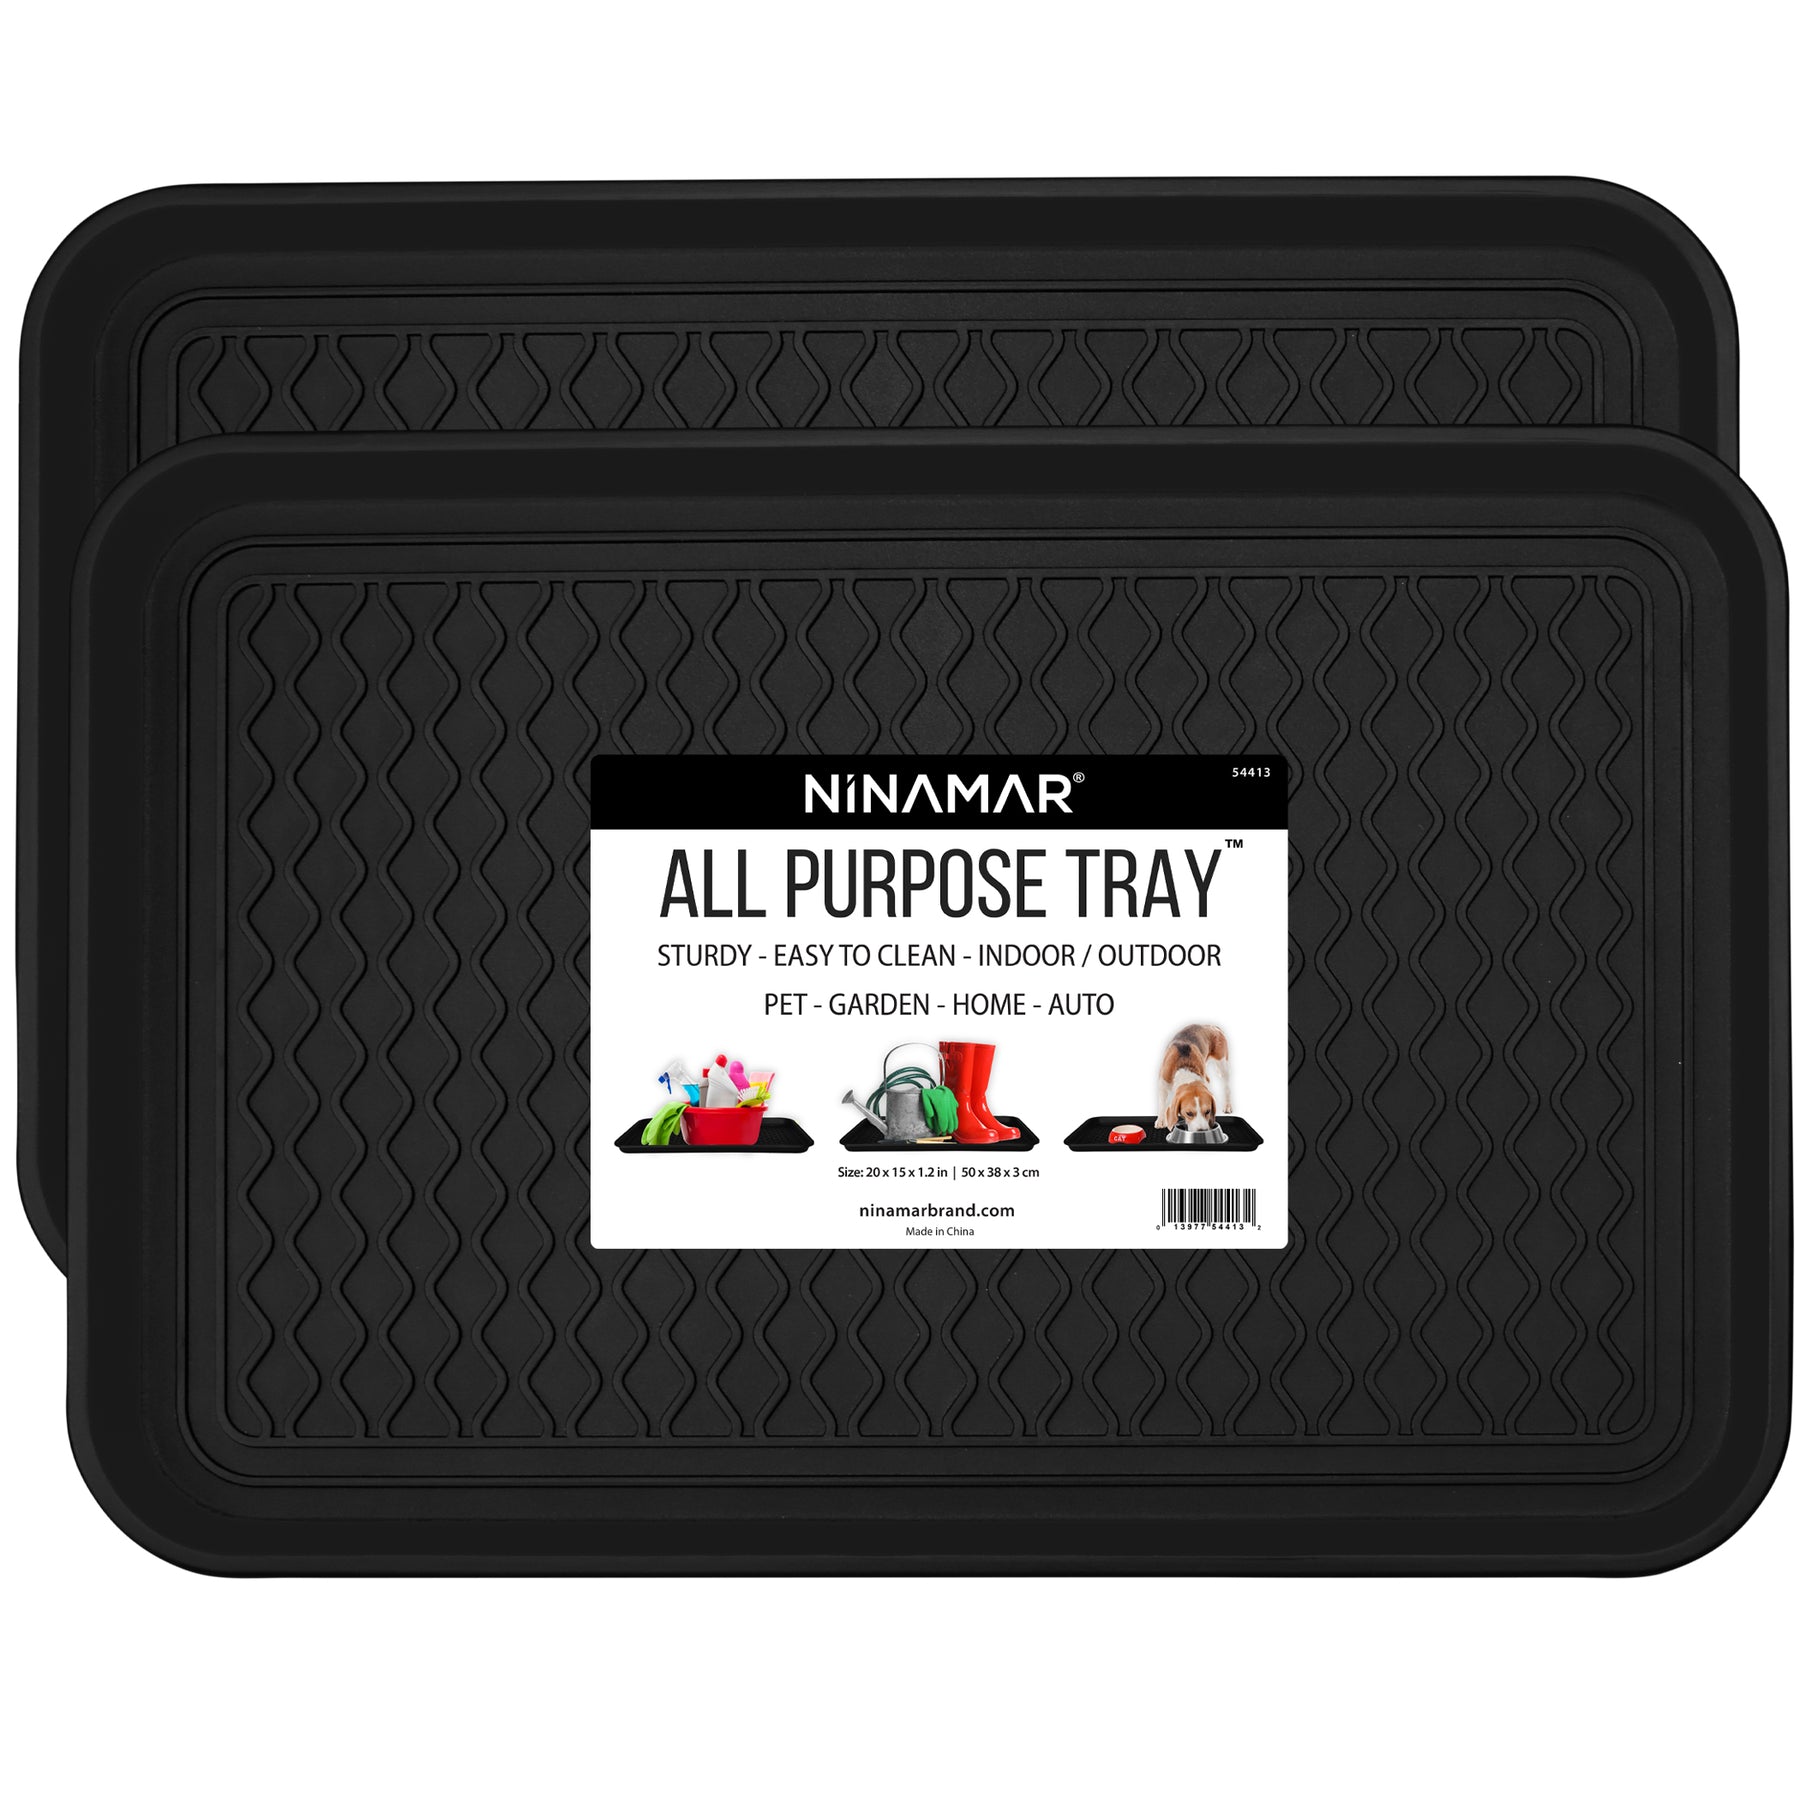 SafetyCare Rubber Shoe & Boot Tray - Multi-Purpose - 24 x 16 Inches - 2 Mats